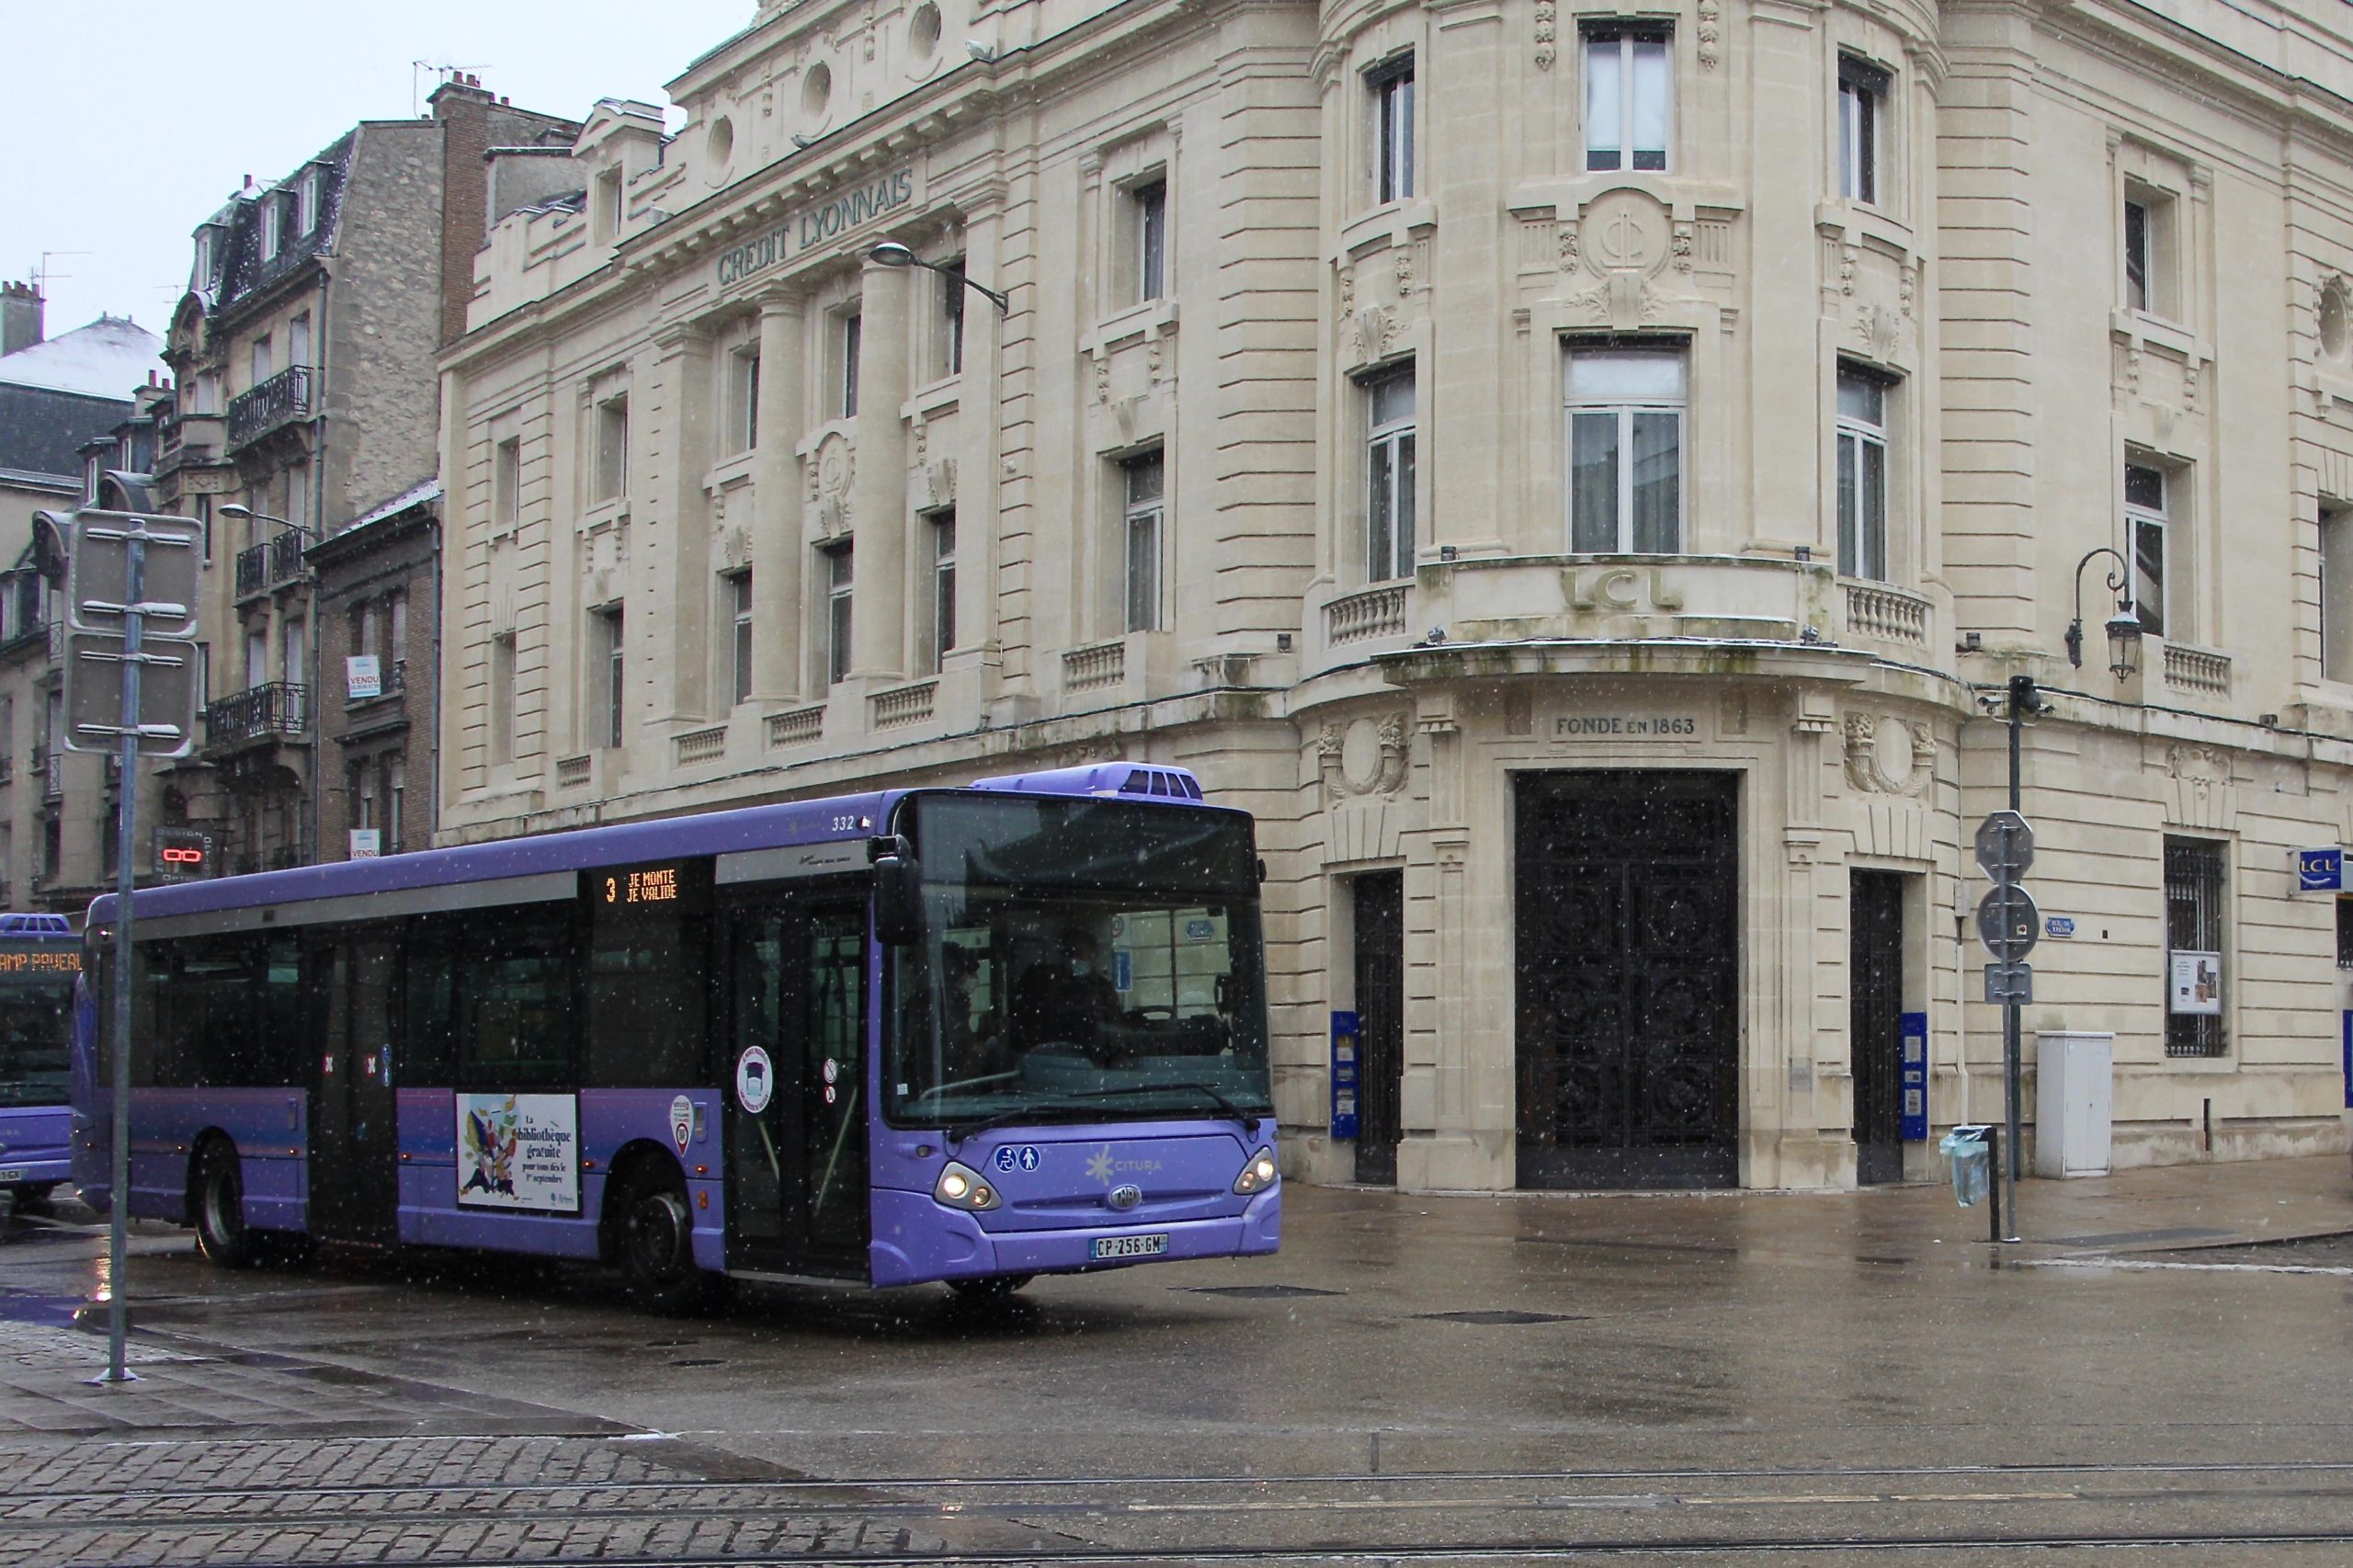 A purple CITURA bus on a street corner in Reims, France.